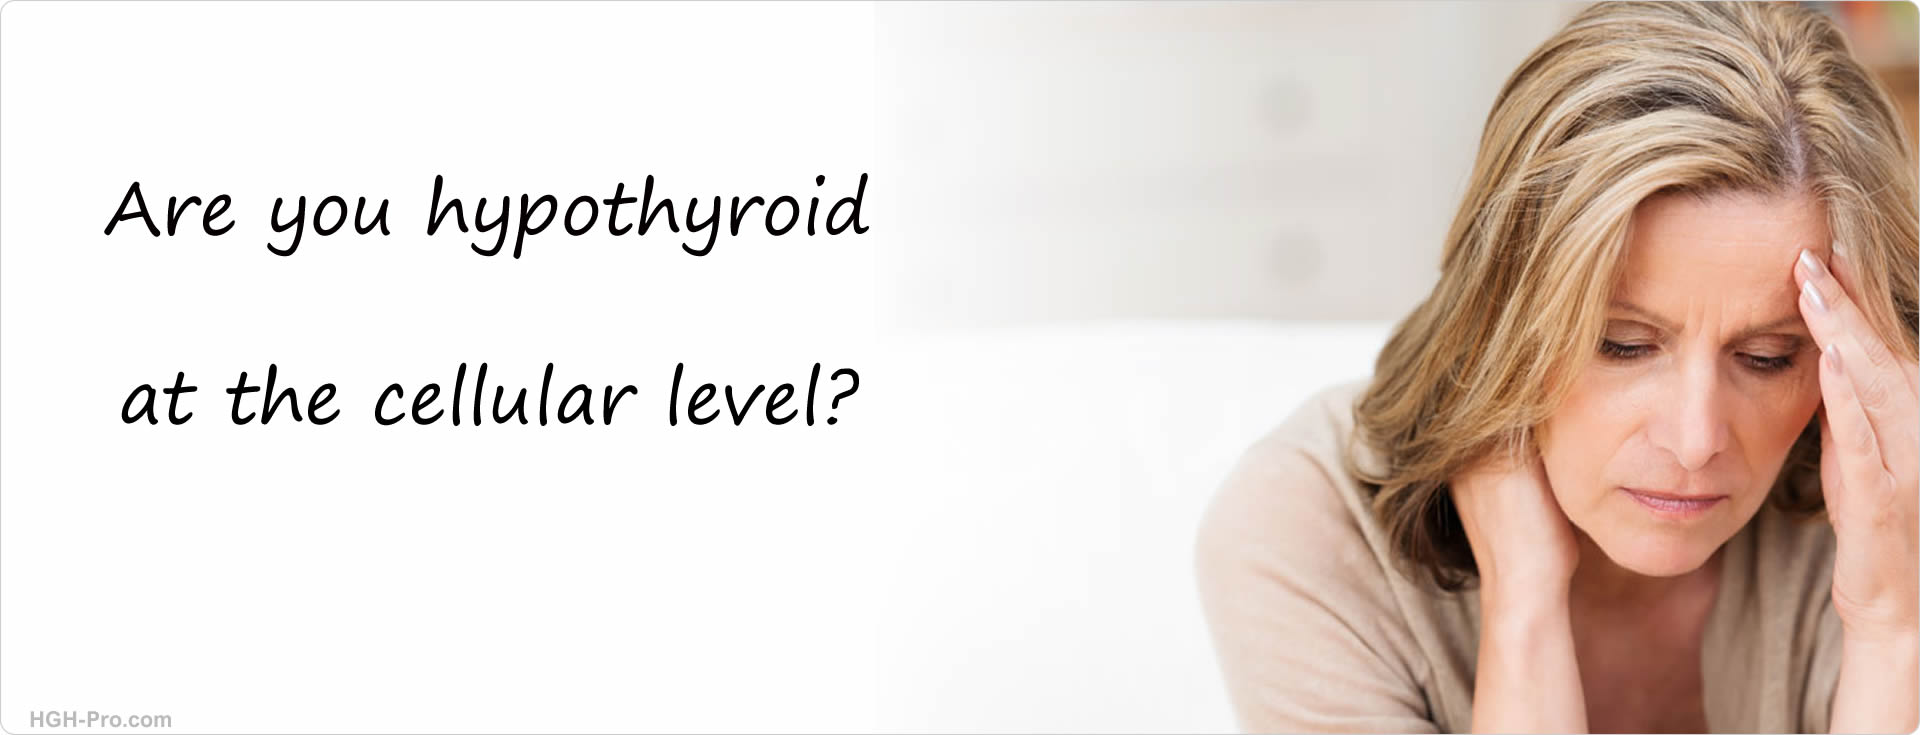 Hypothyroid at the cellular level